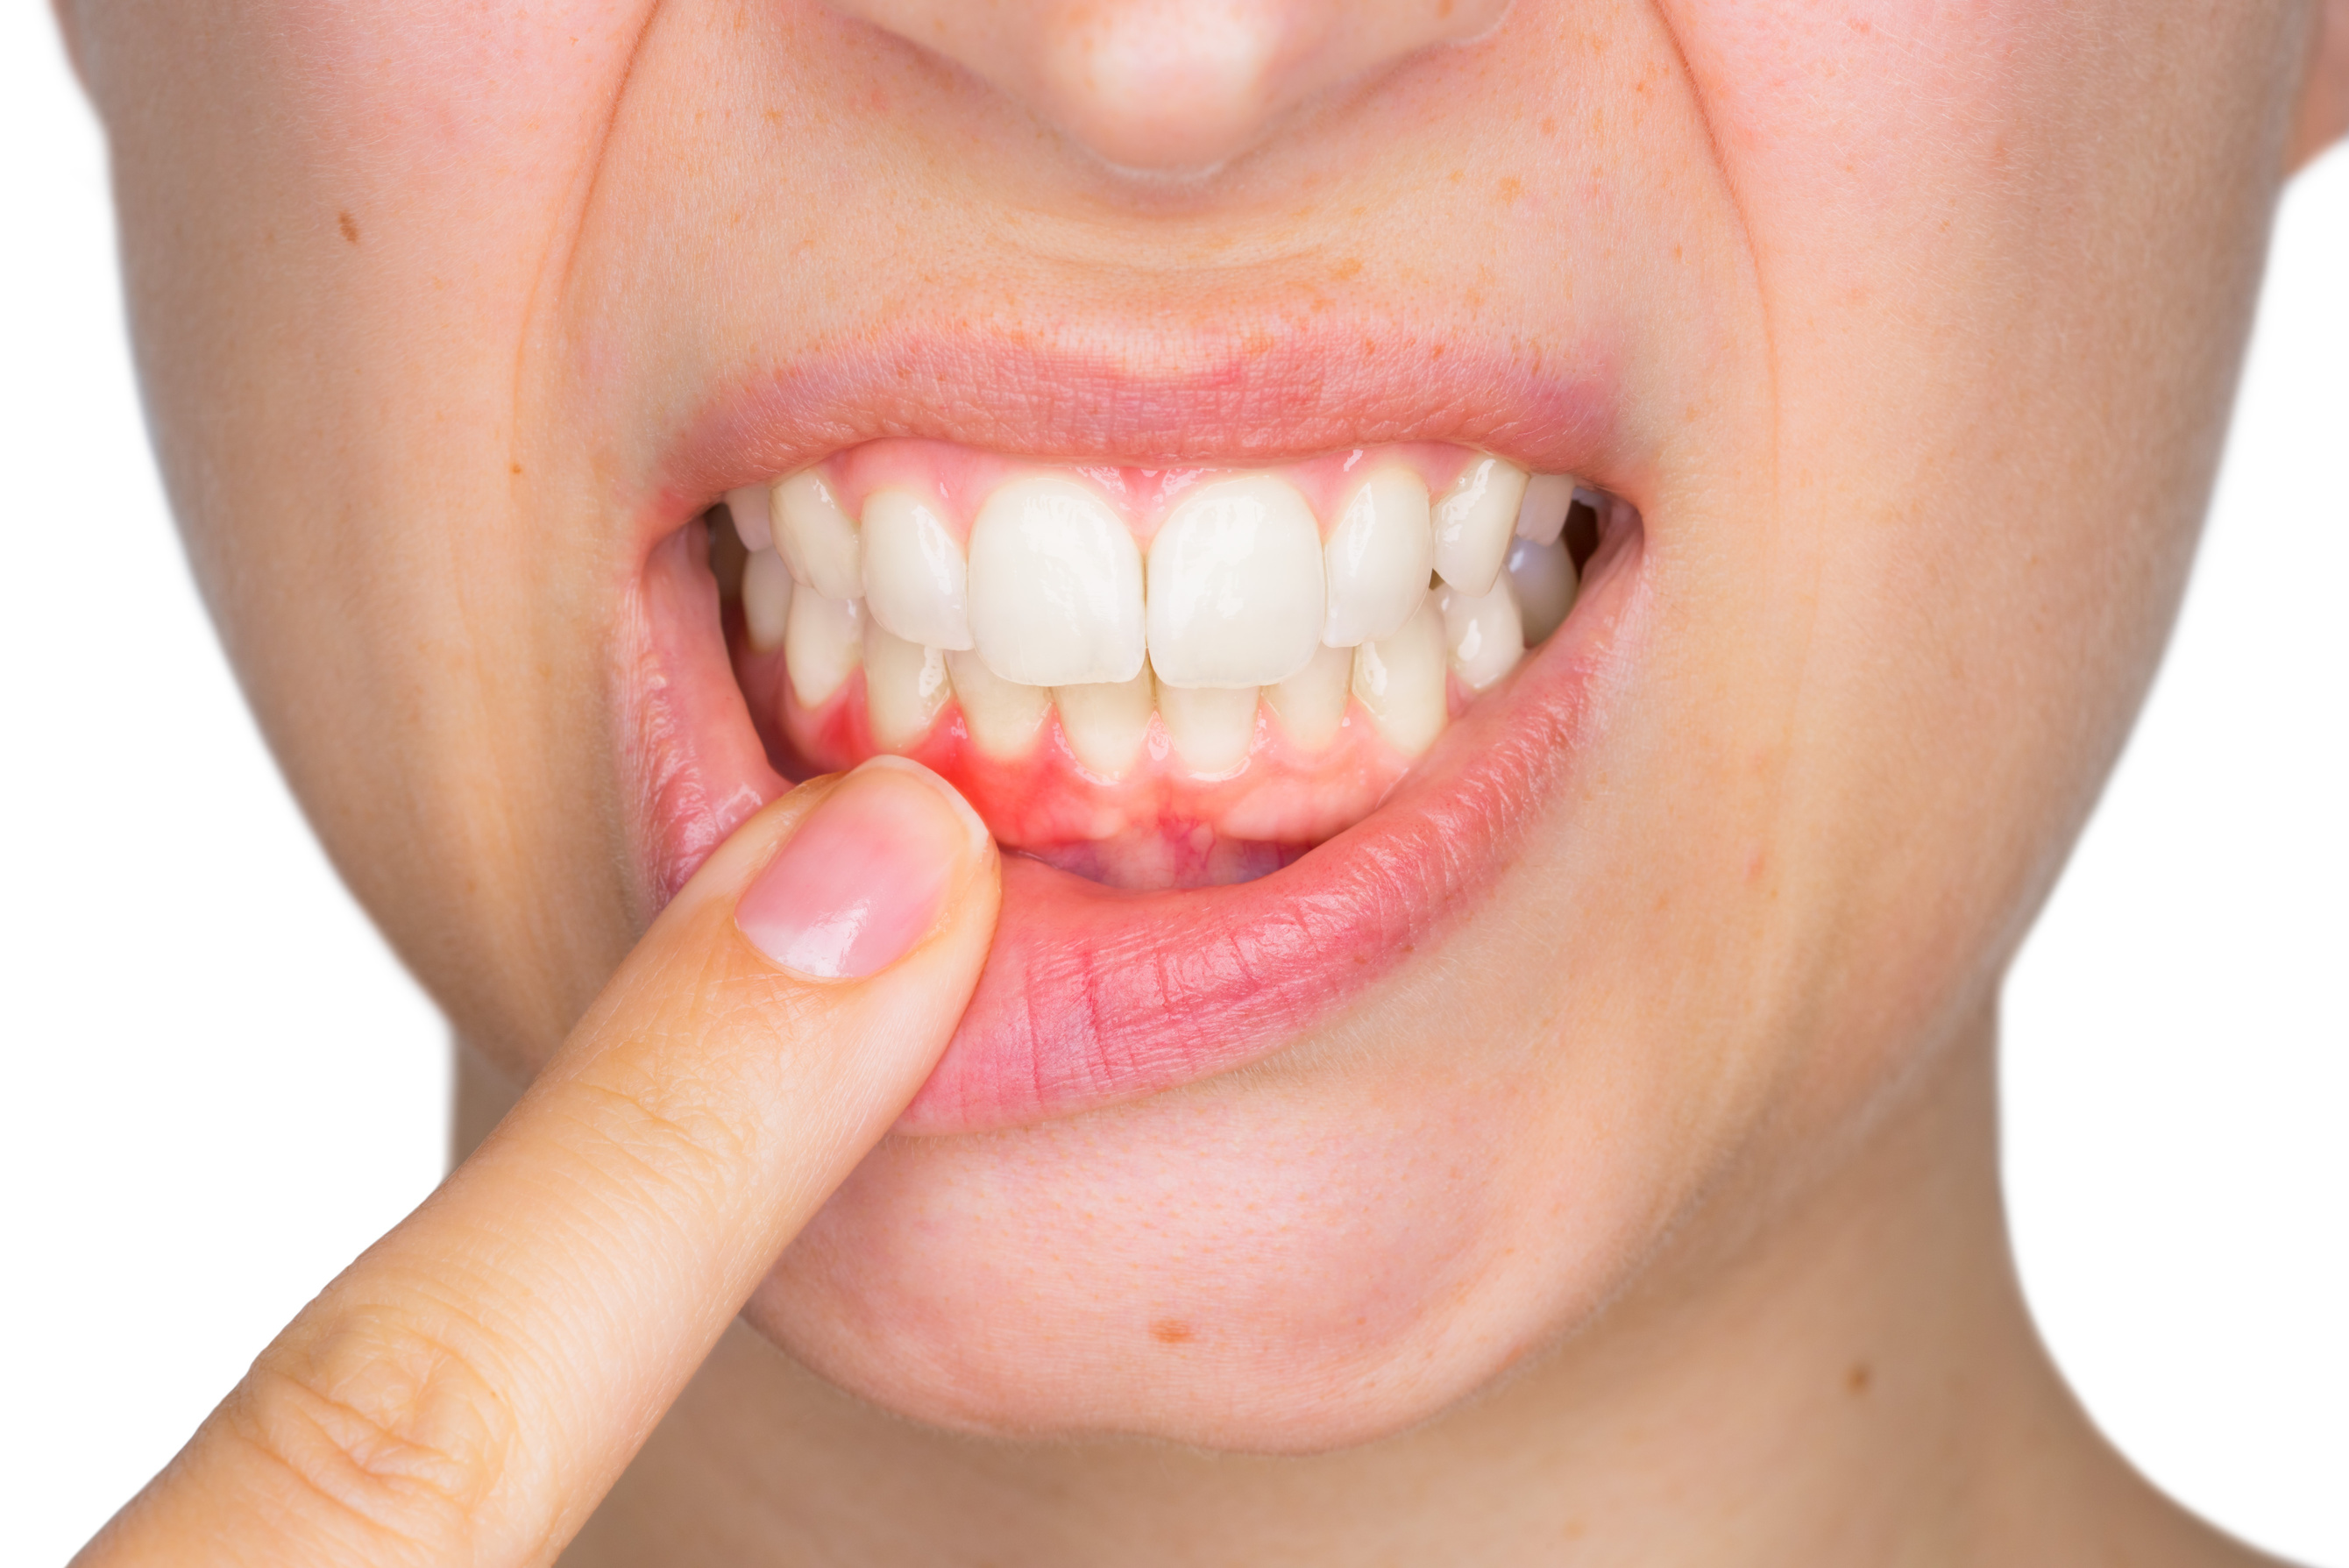 What are the Symptoms of Sore Gums and the Treatment for Sore Gums?